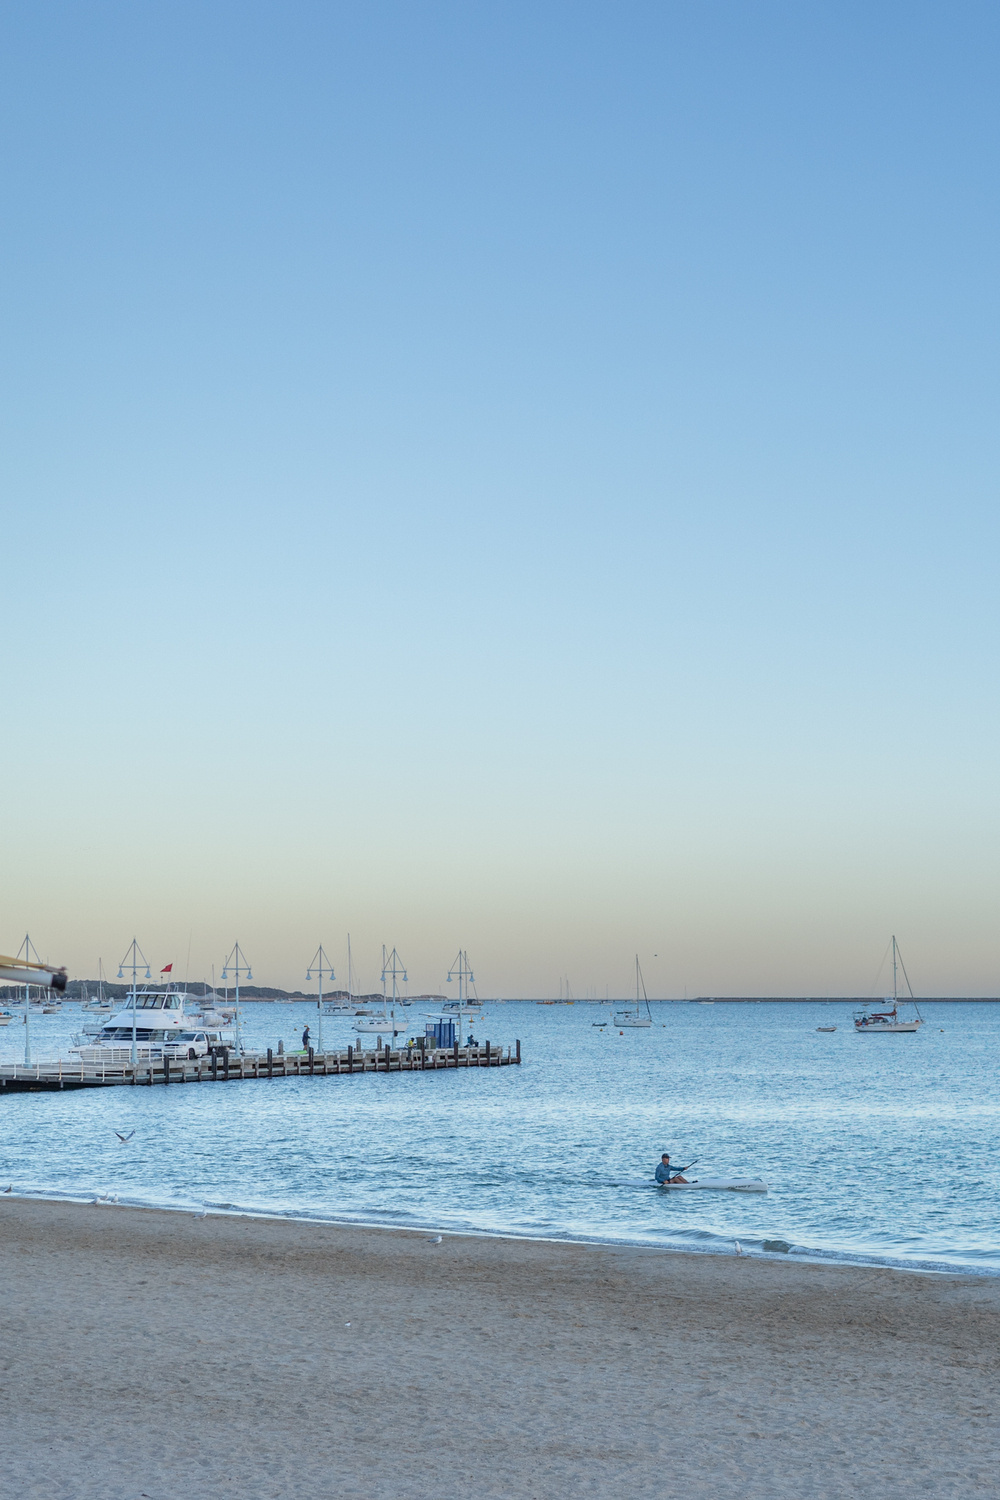 Beach scene with a clear sky at dusk, featuring a person kayaking in the sea, a pier with people, sailboats in the distance, and a boat dock on the left.